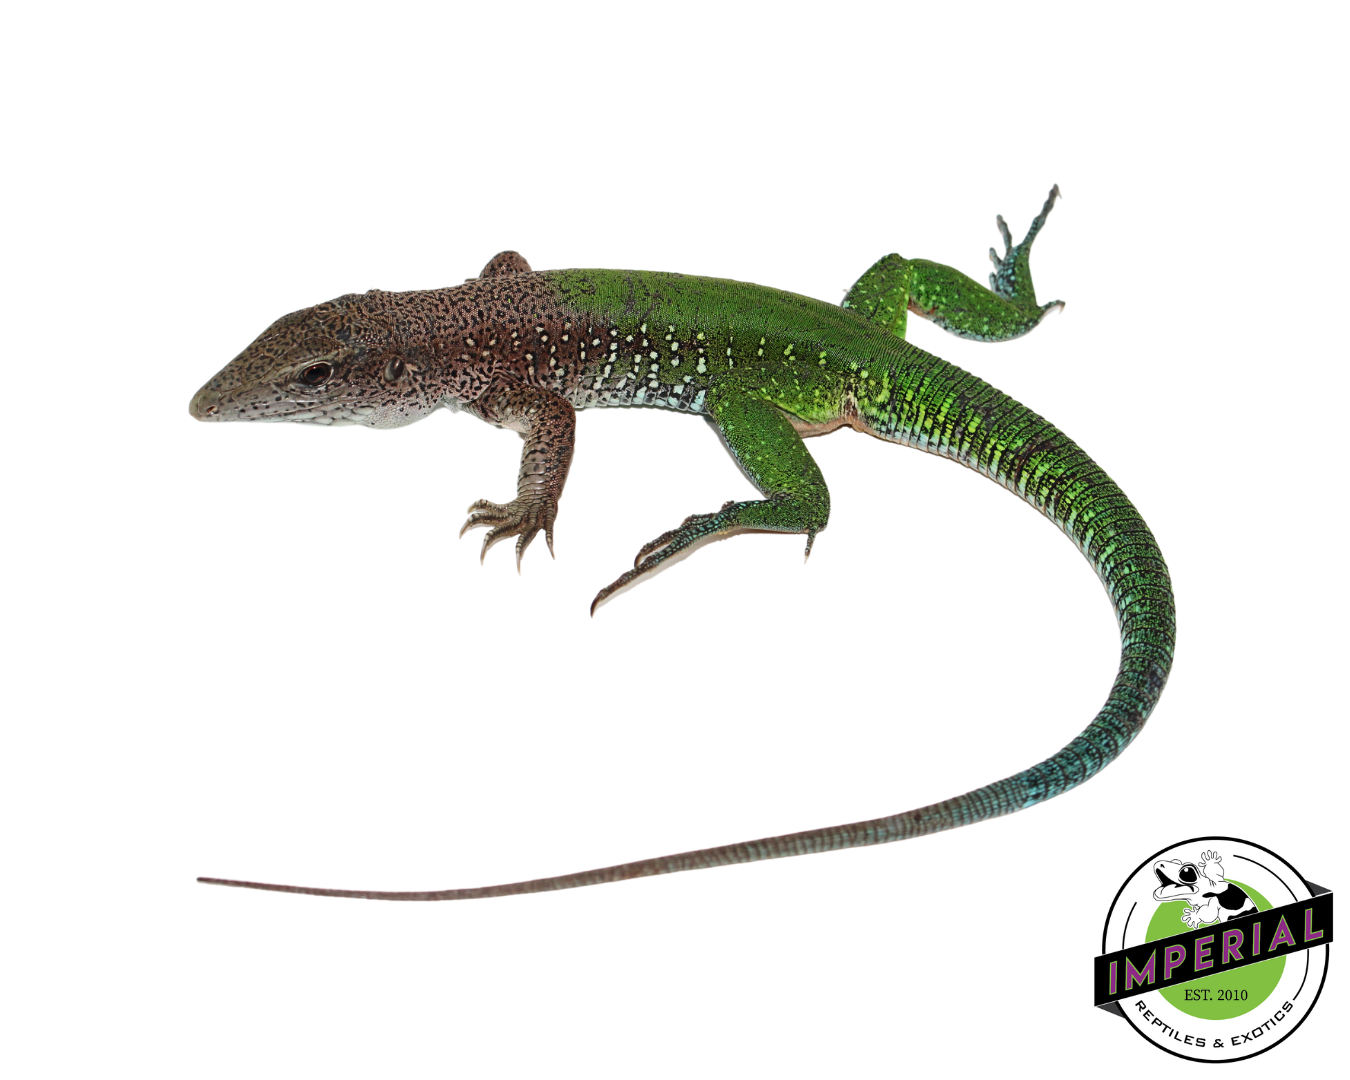 Green Ameiva for sale, reptiles for sale, buy animals online